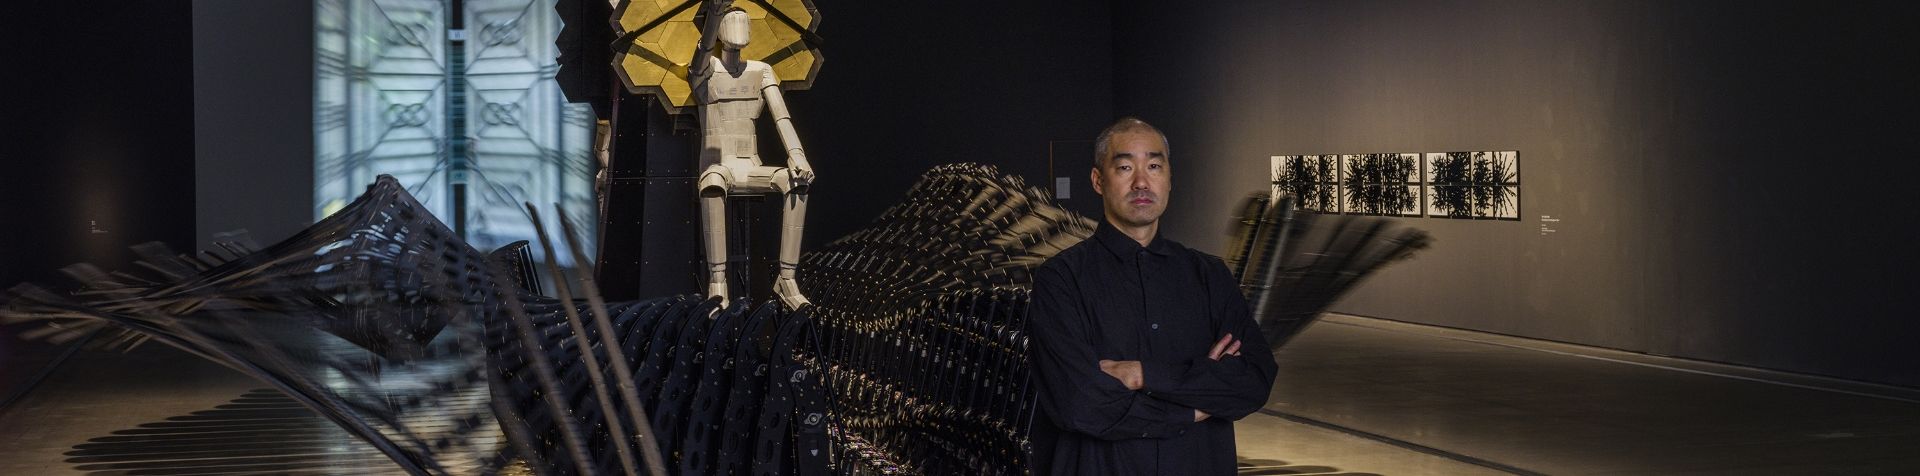 Artist Choe U-Ram standing in front of his Little Ark exhibition. He is wearing a black shirt and has his arms folded across his chest. Behind him the Little Ark piece is moving and there is a white human sculpture sitting above it with a hexagonal gold piece set behind it.